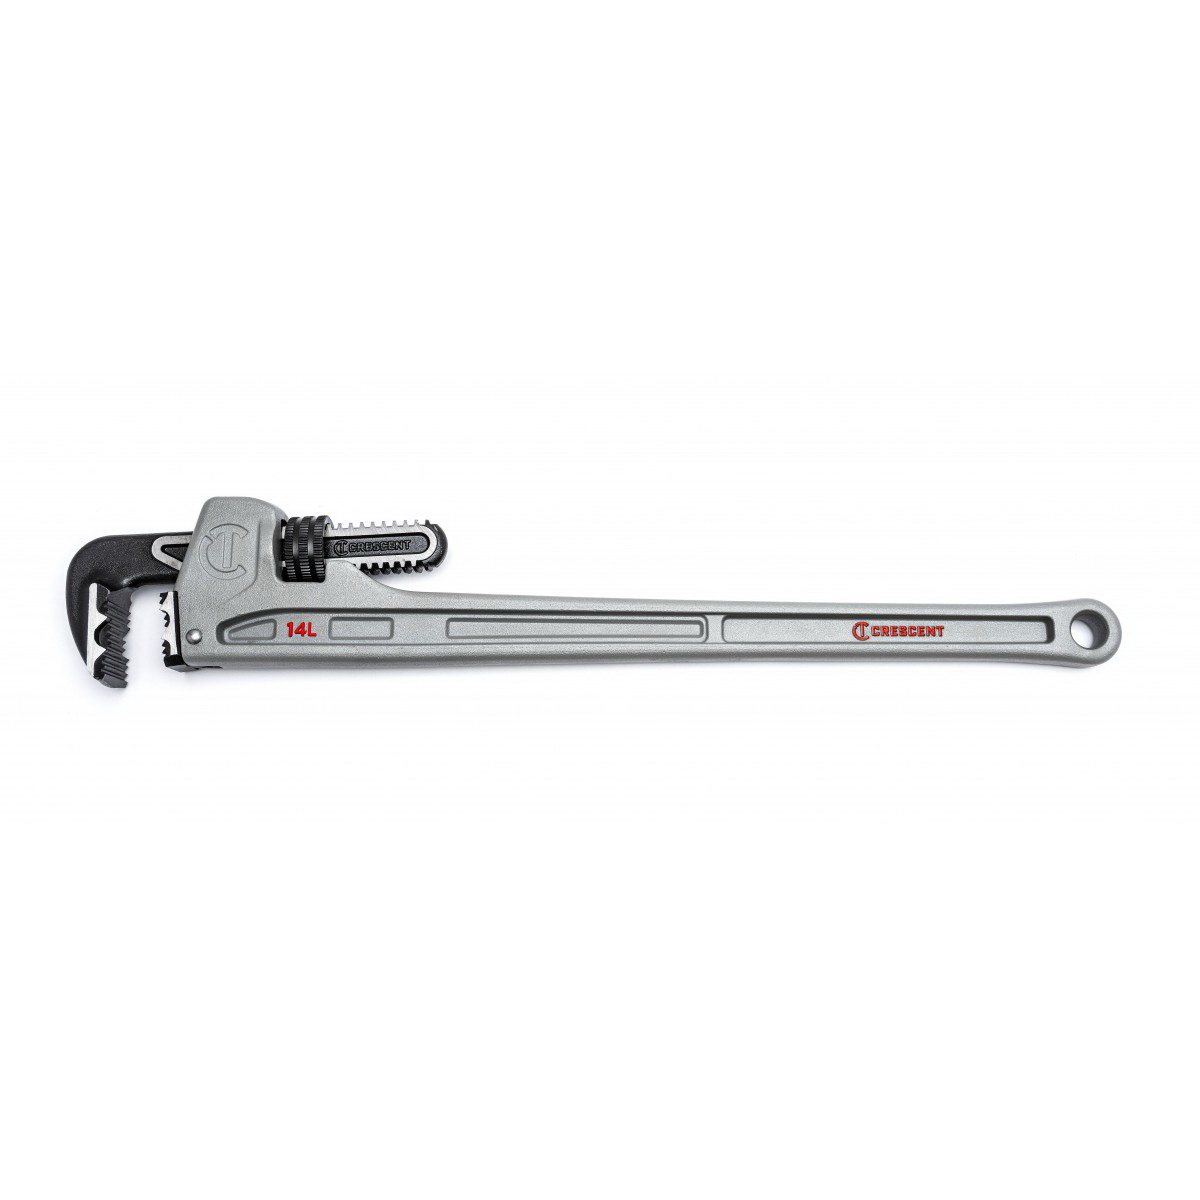 CAPW14L Pipe Wrench, 0 to 2-3/8 in Jaw, 14 in L, Aluminum, Powder-Coated, Long Handle